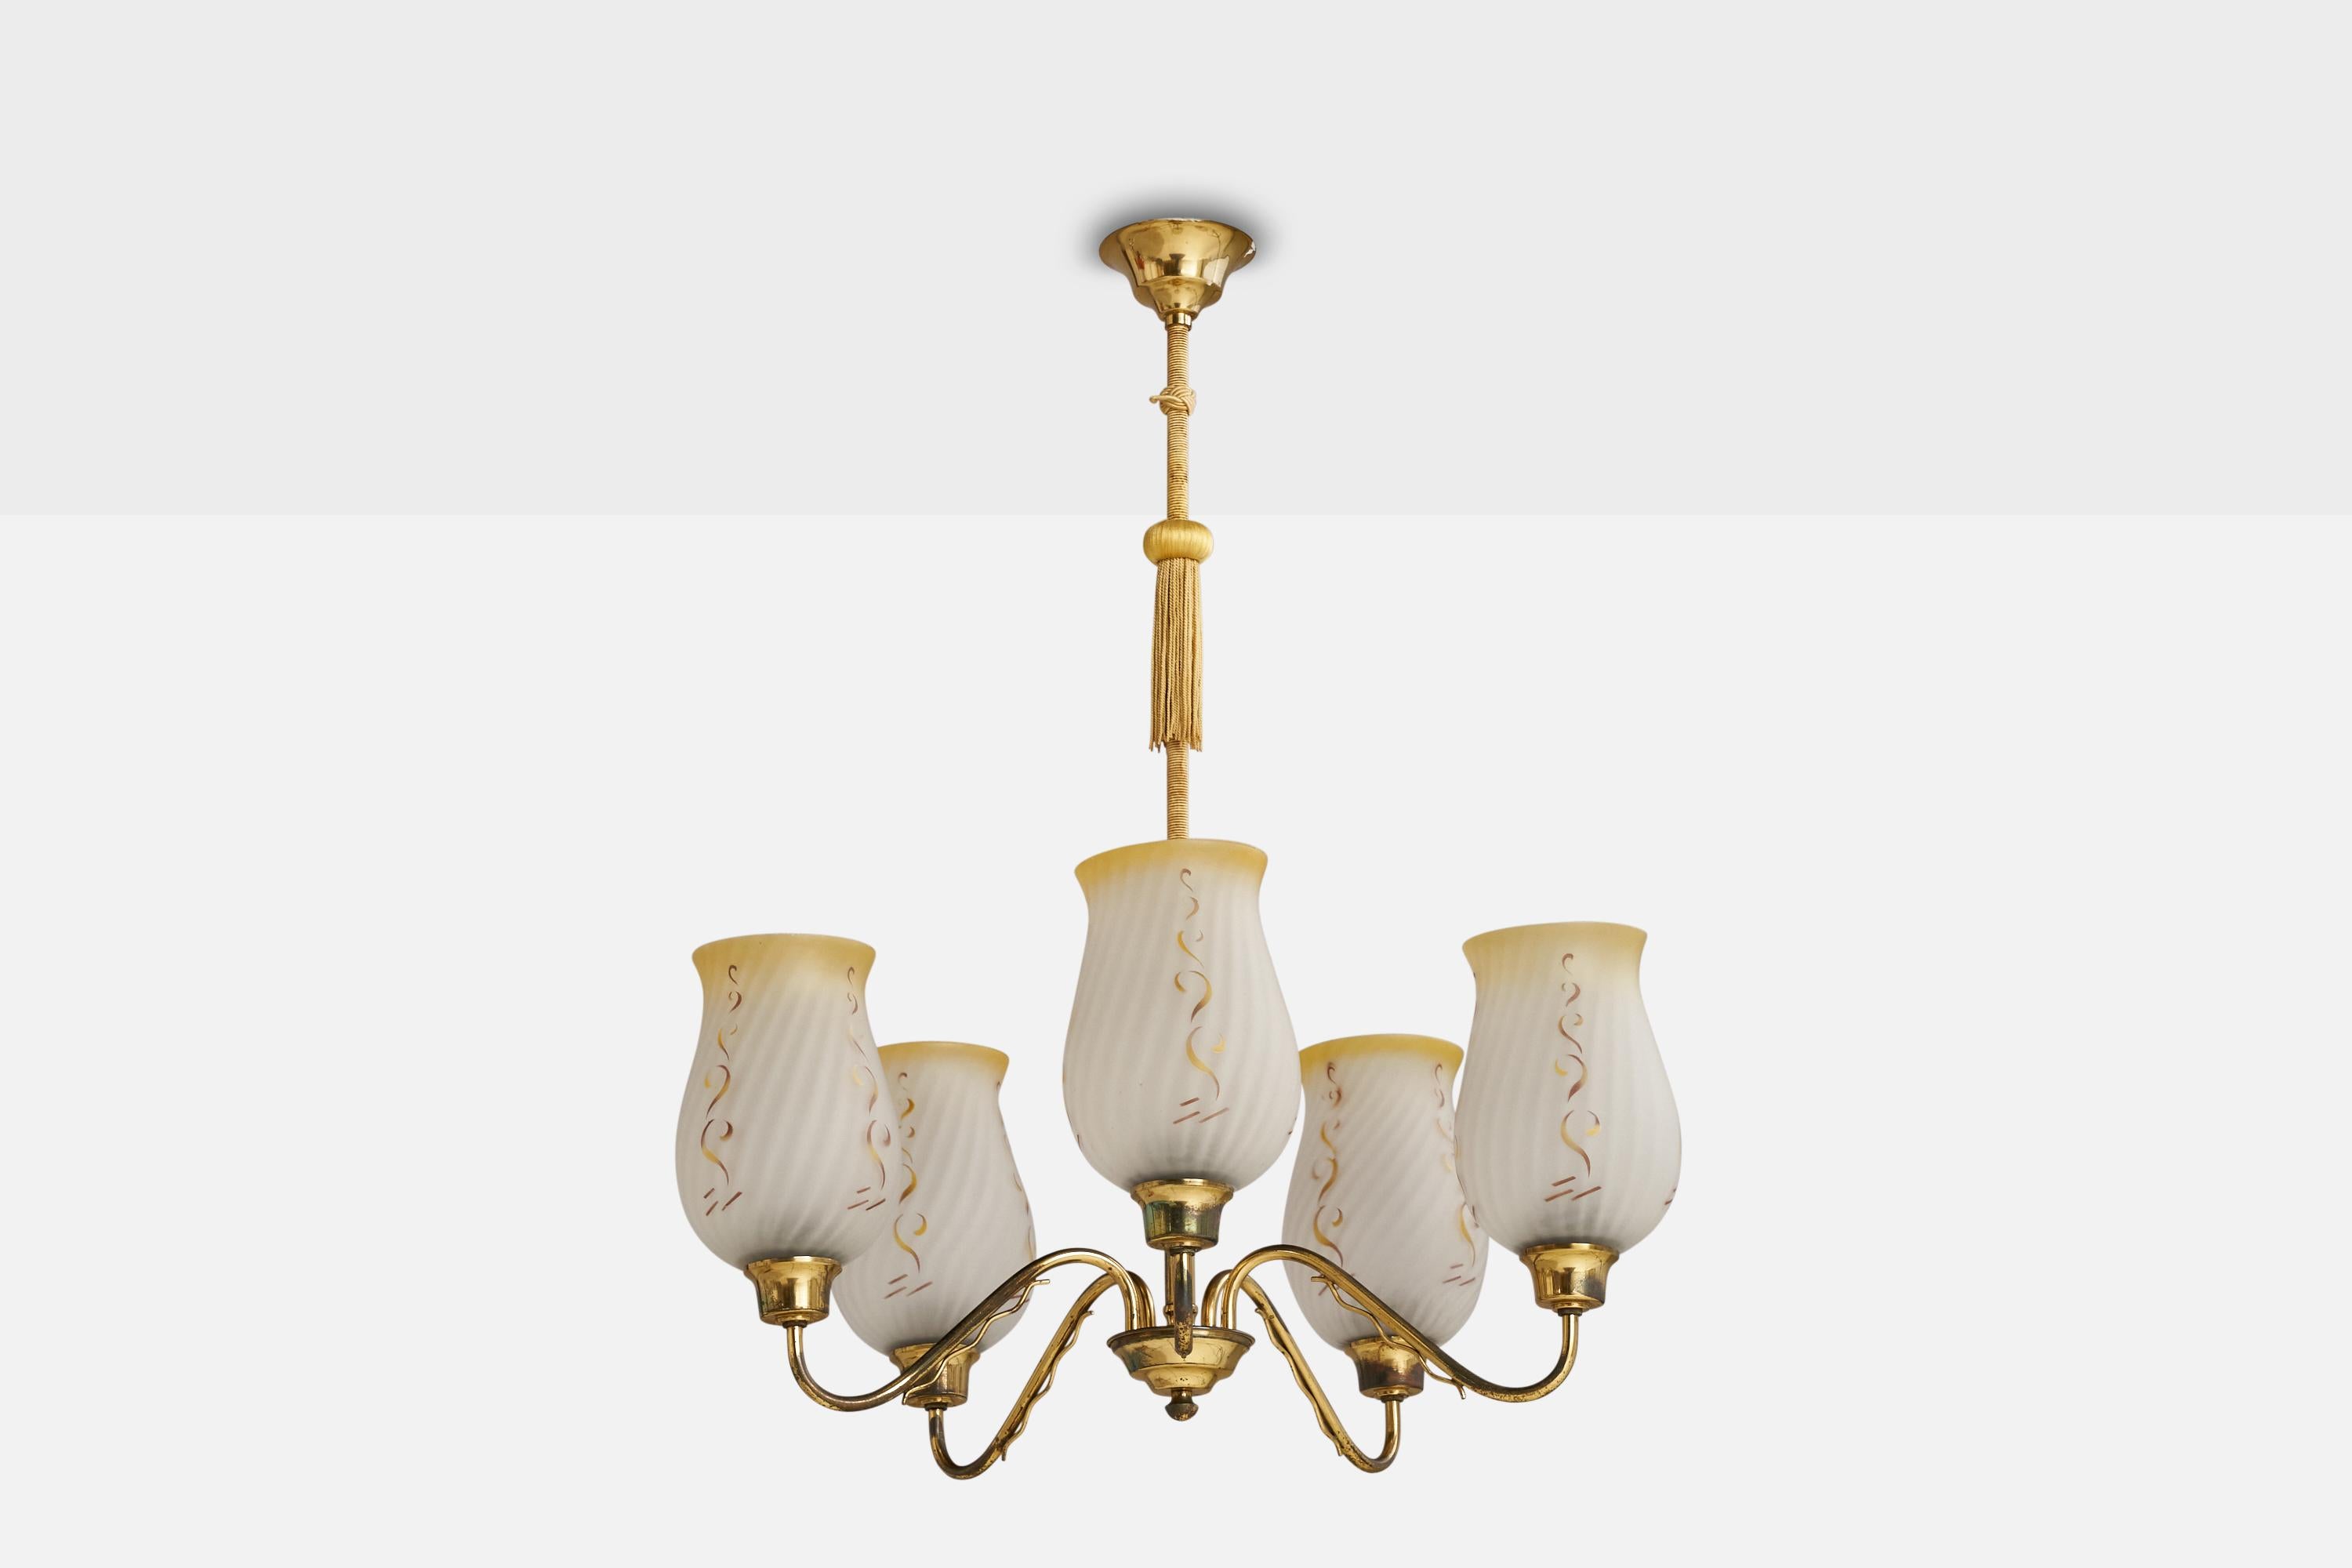 A brass, beige fabric string and etched glass chandelier designed and produced in Sweden, 1940s.

Dimensions of canopy (inches): 2” H x 3.75”Diameter
Socket takes standard E-26 bulbs. 5 sockets.There is no maximum wattage stated on the fixture. All